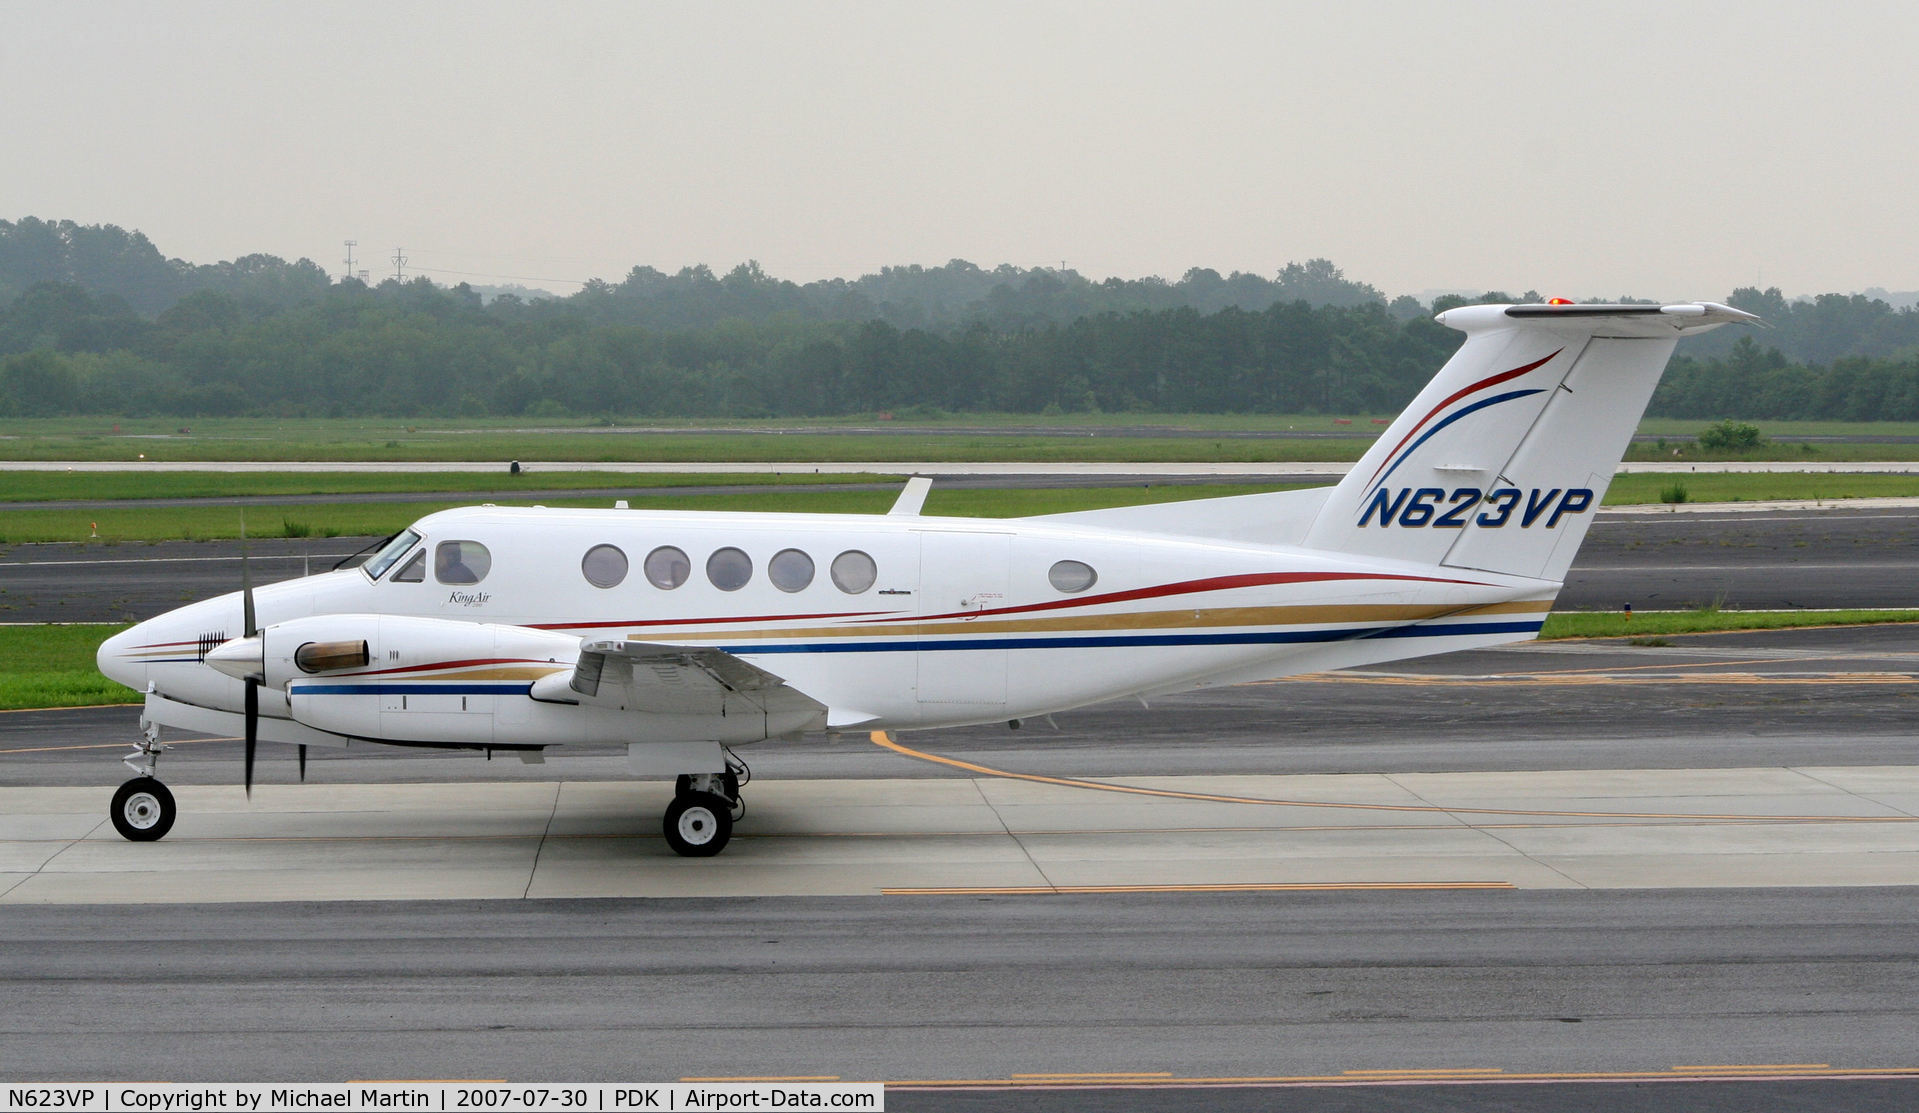 N623VP, 1981 Beech 200 C/N BB-769, Taxing to Signature Flight Services